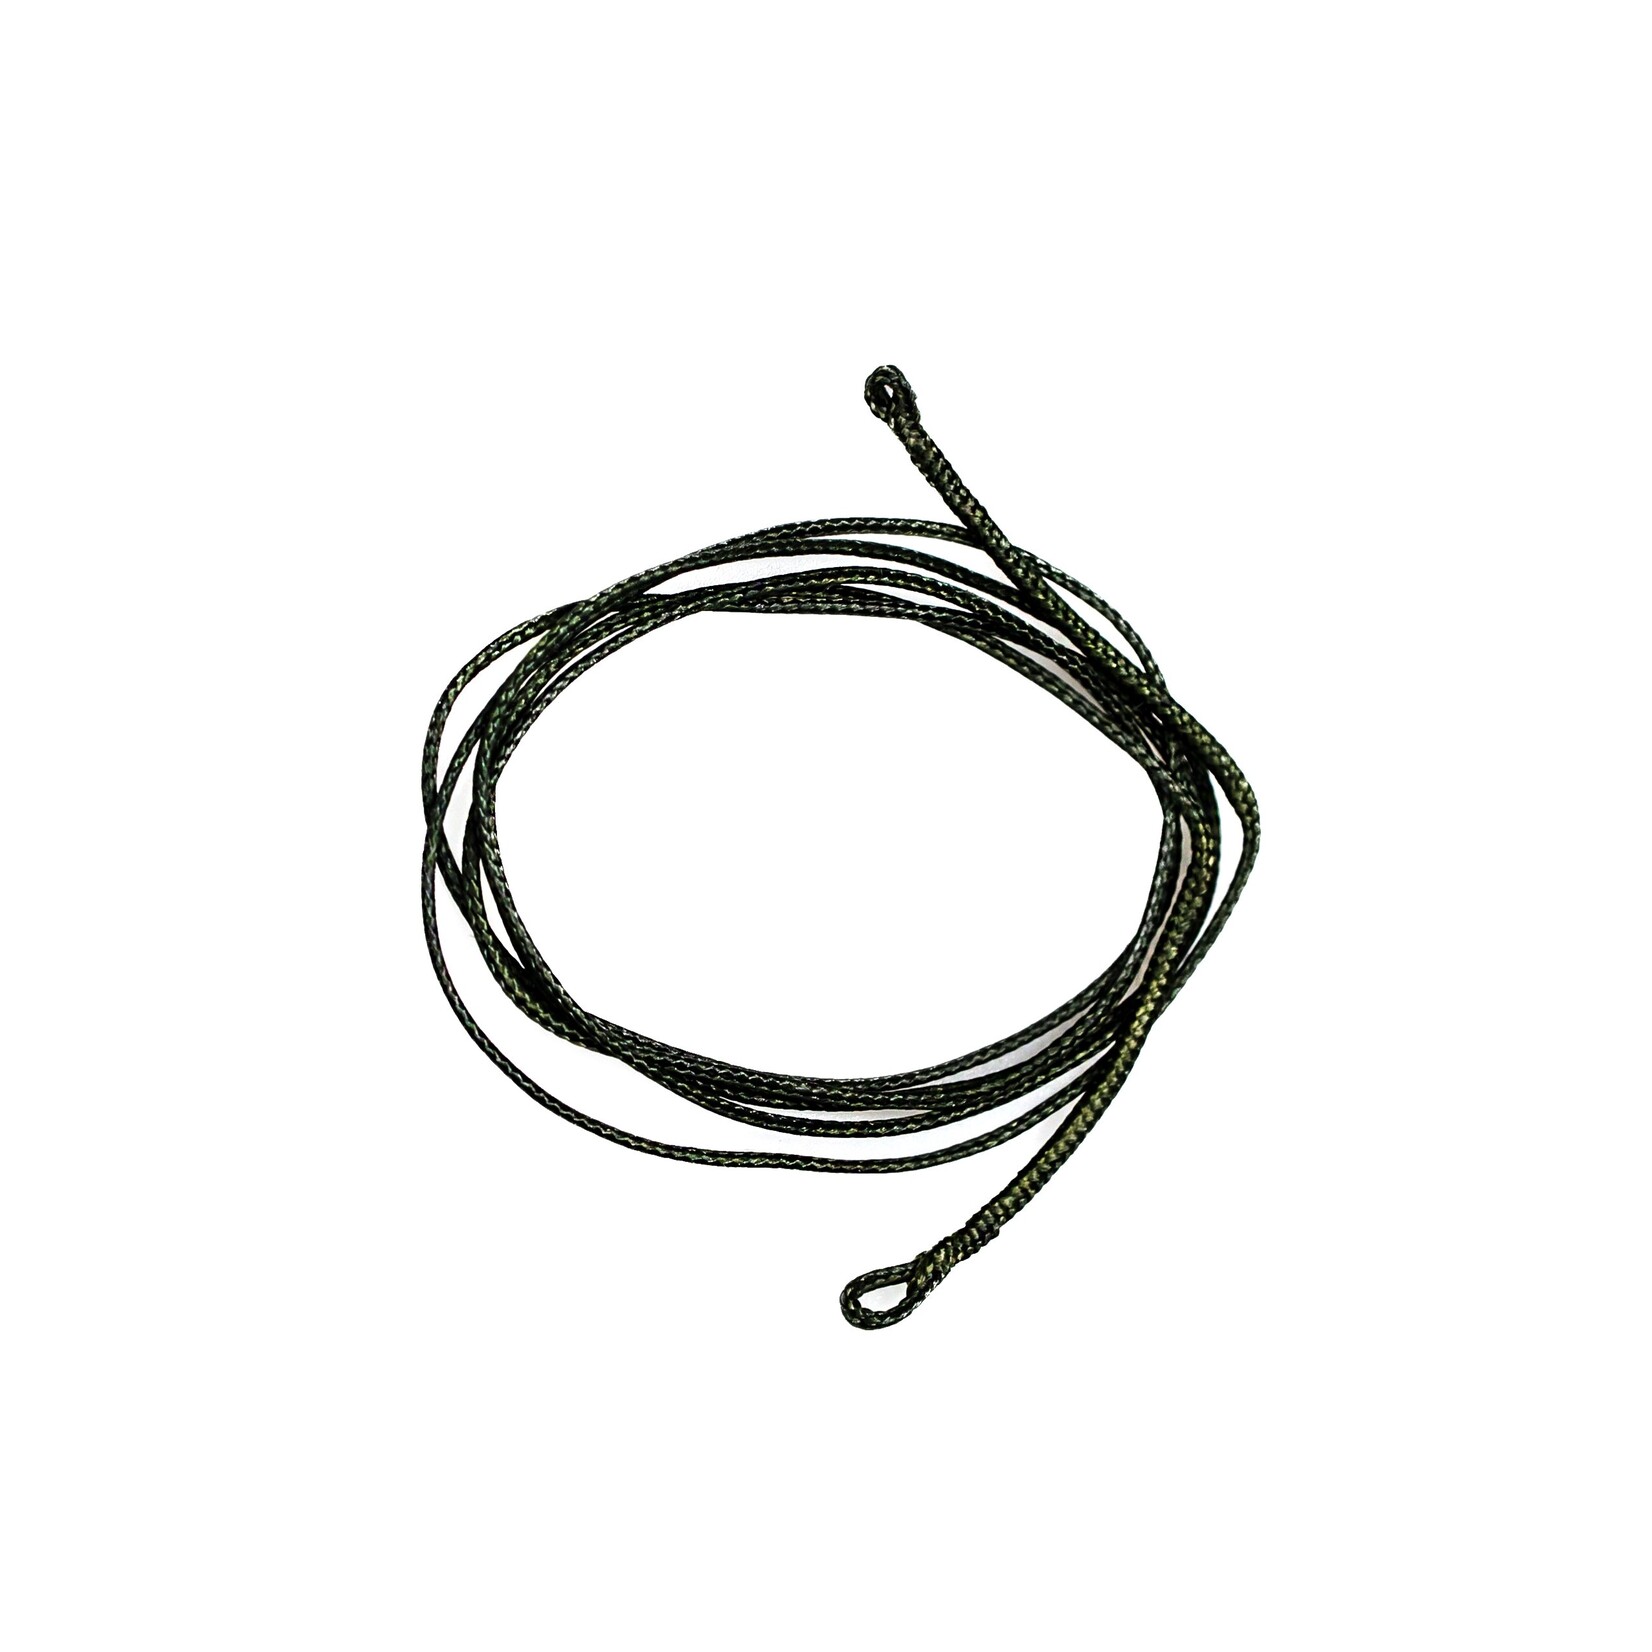 baitsolutions Baitsolutions Flexi Leader 90cm Weed 1 pc - Loop to Loop